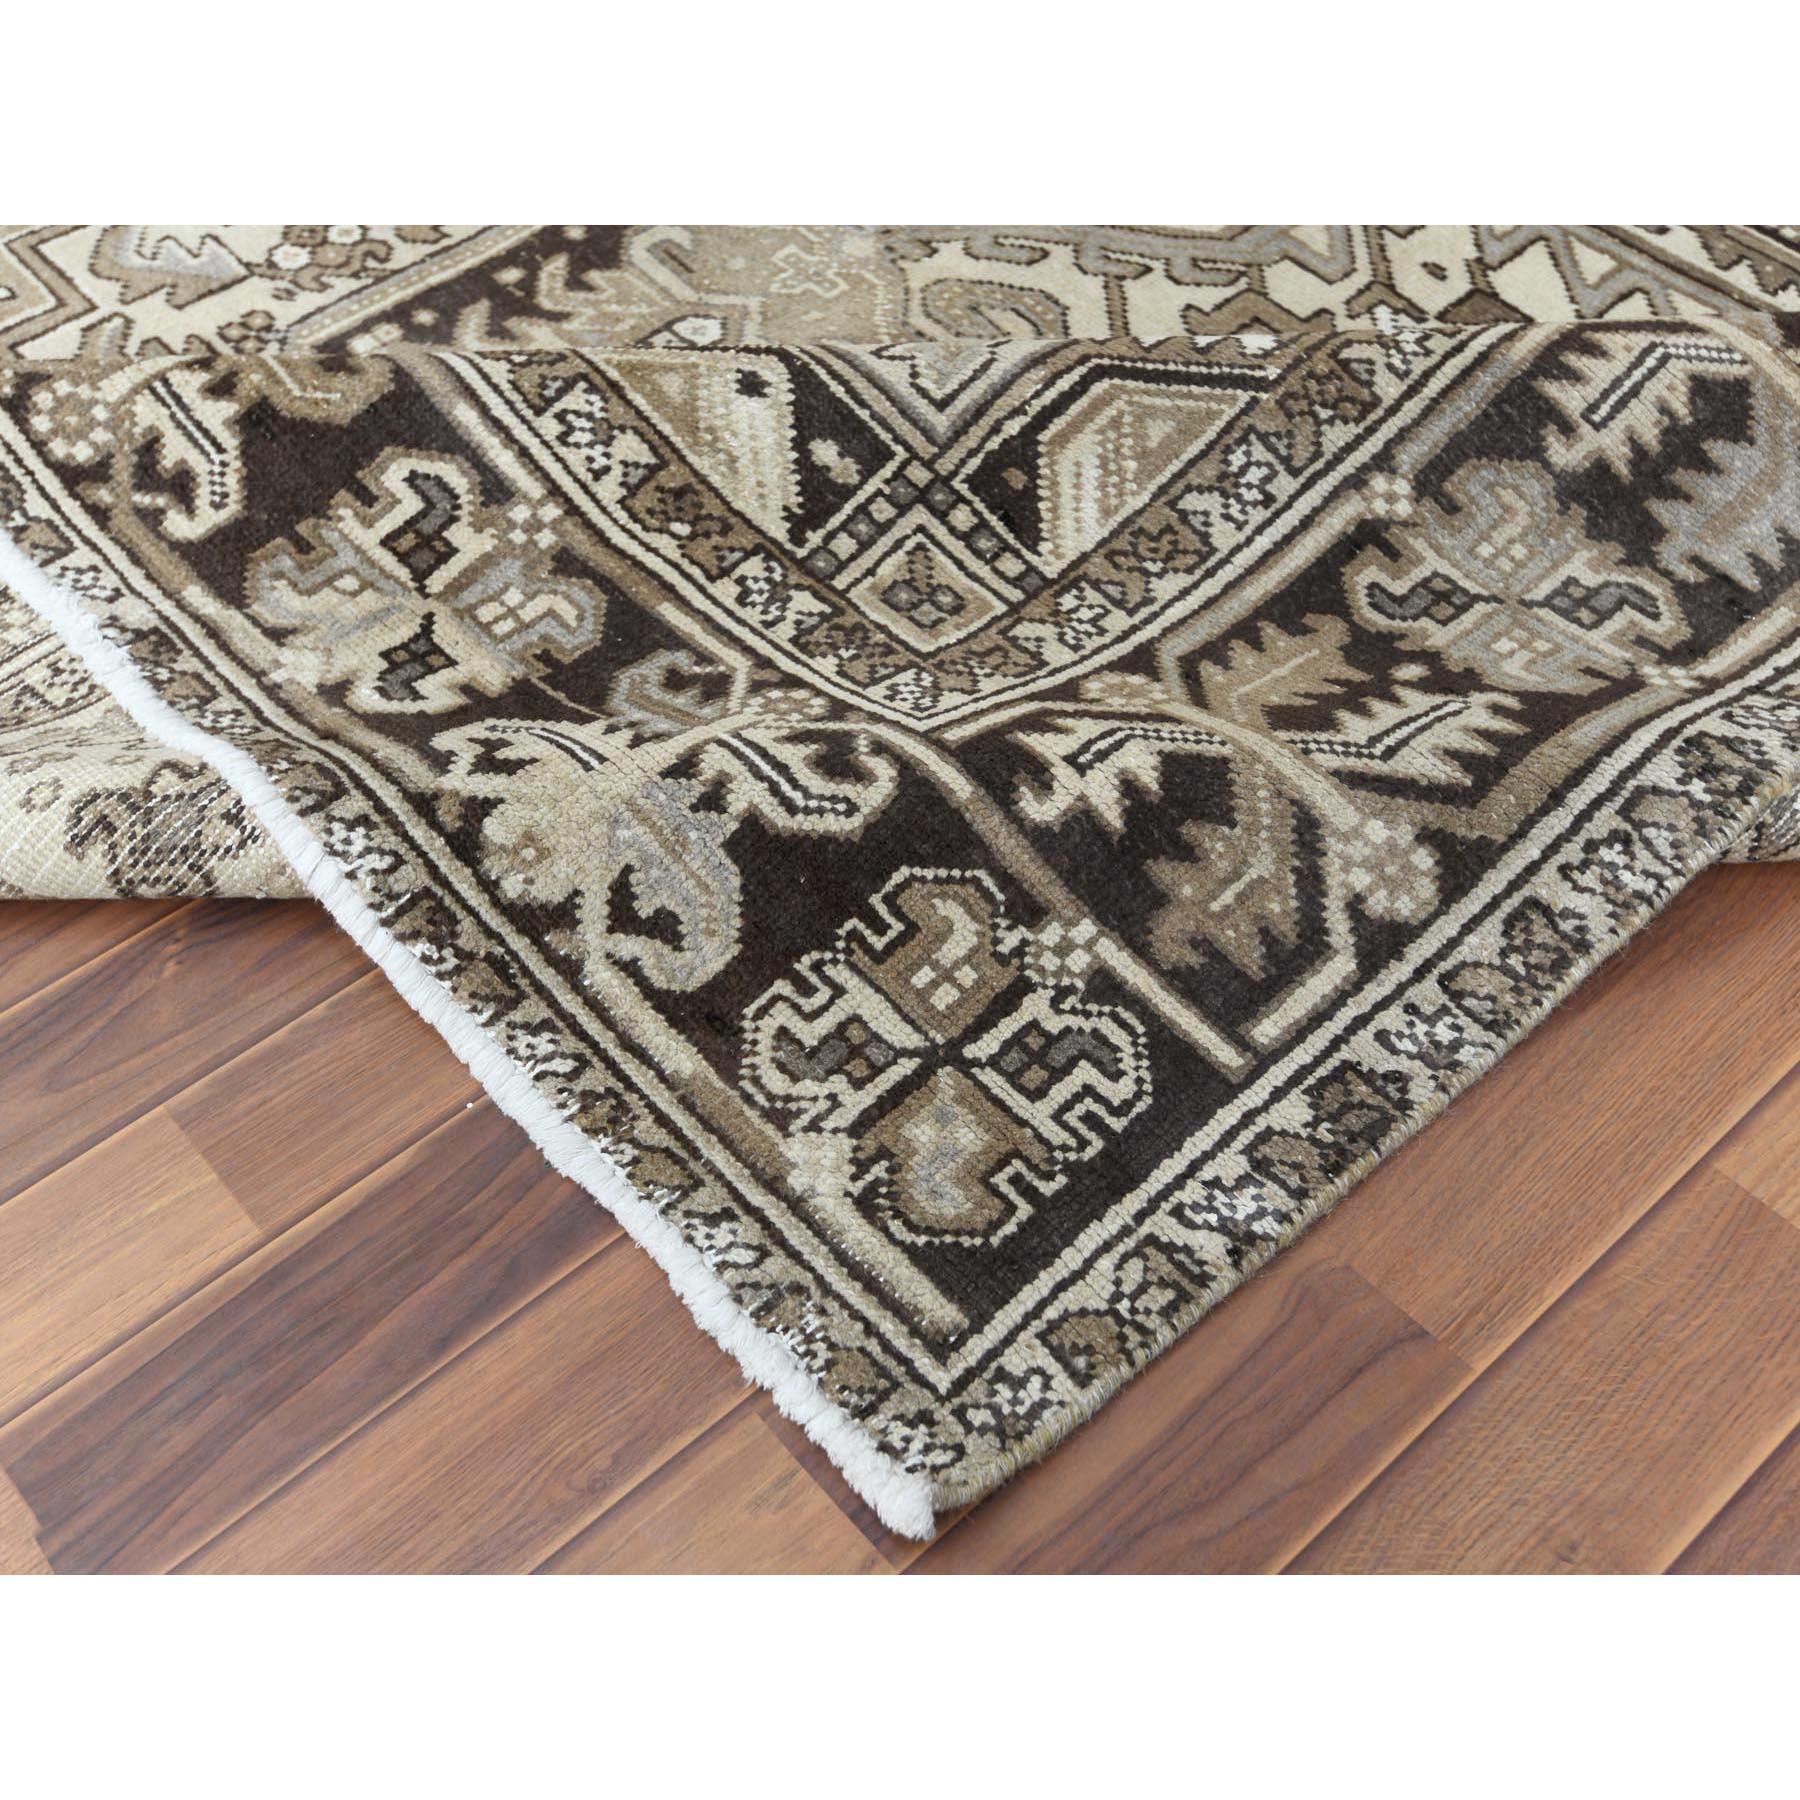 Handmade Washed Out Persian Heriz Vintage Down Organic Soft Wool Rug 1